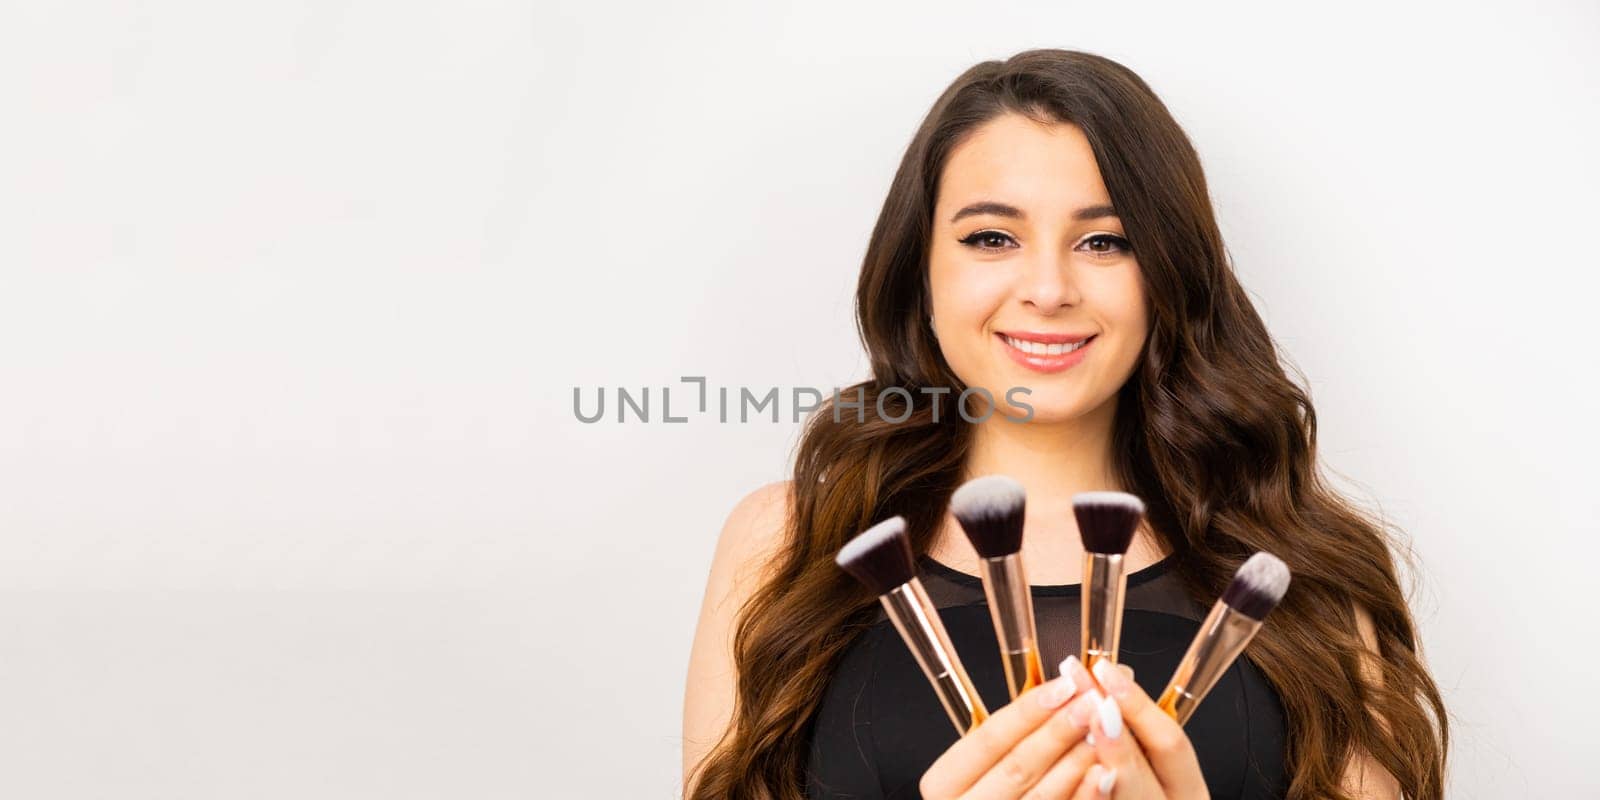 A smiling brunette woman holding makeup brushes on the white background by vladimka